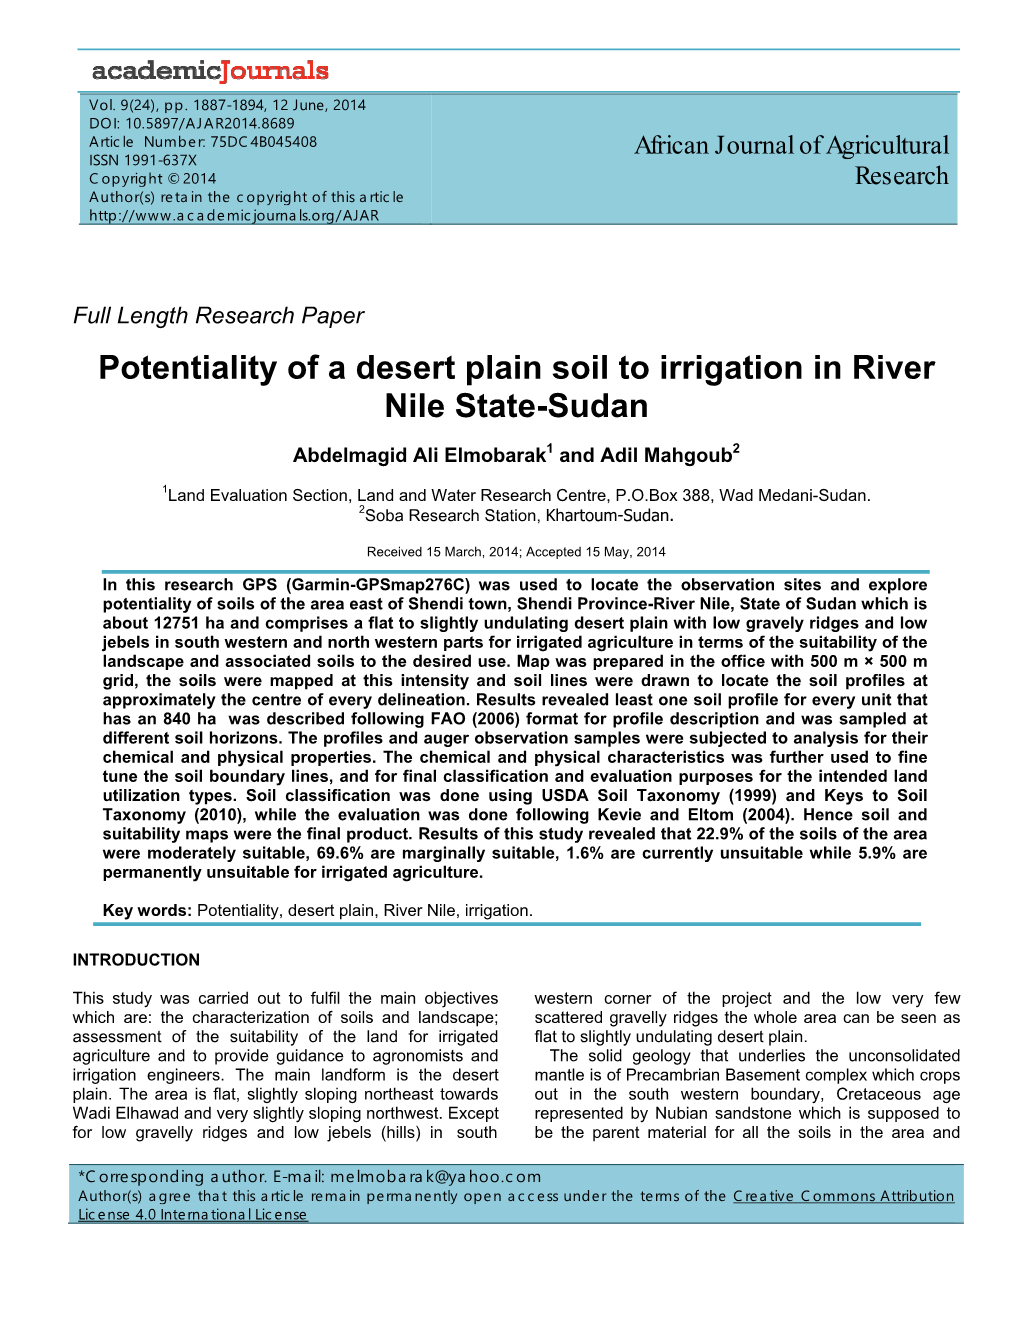 Potentiality of a Desert Plain Soil to Irrigation in River Nile State-Sudan